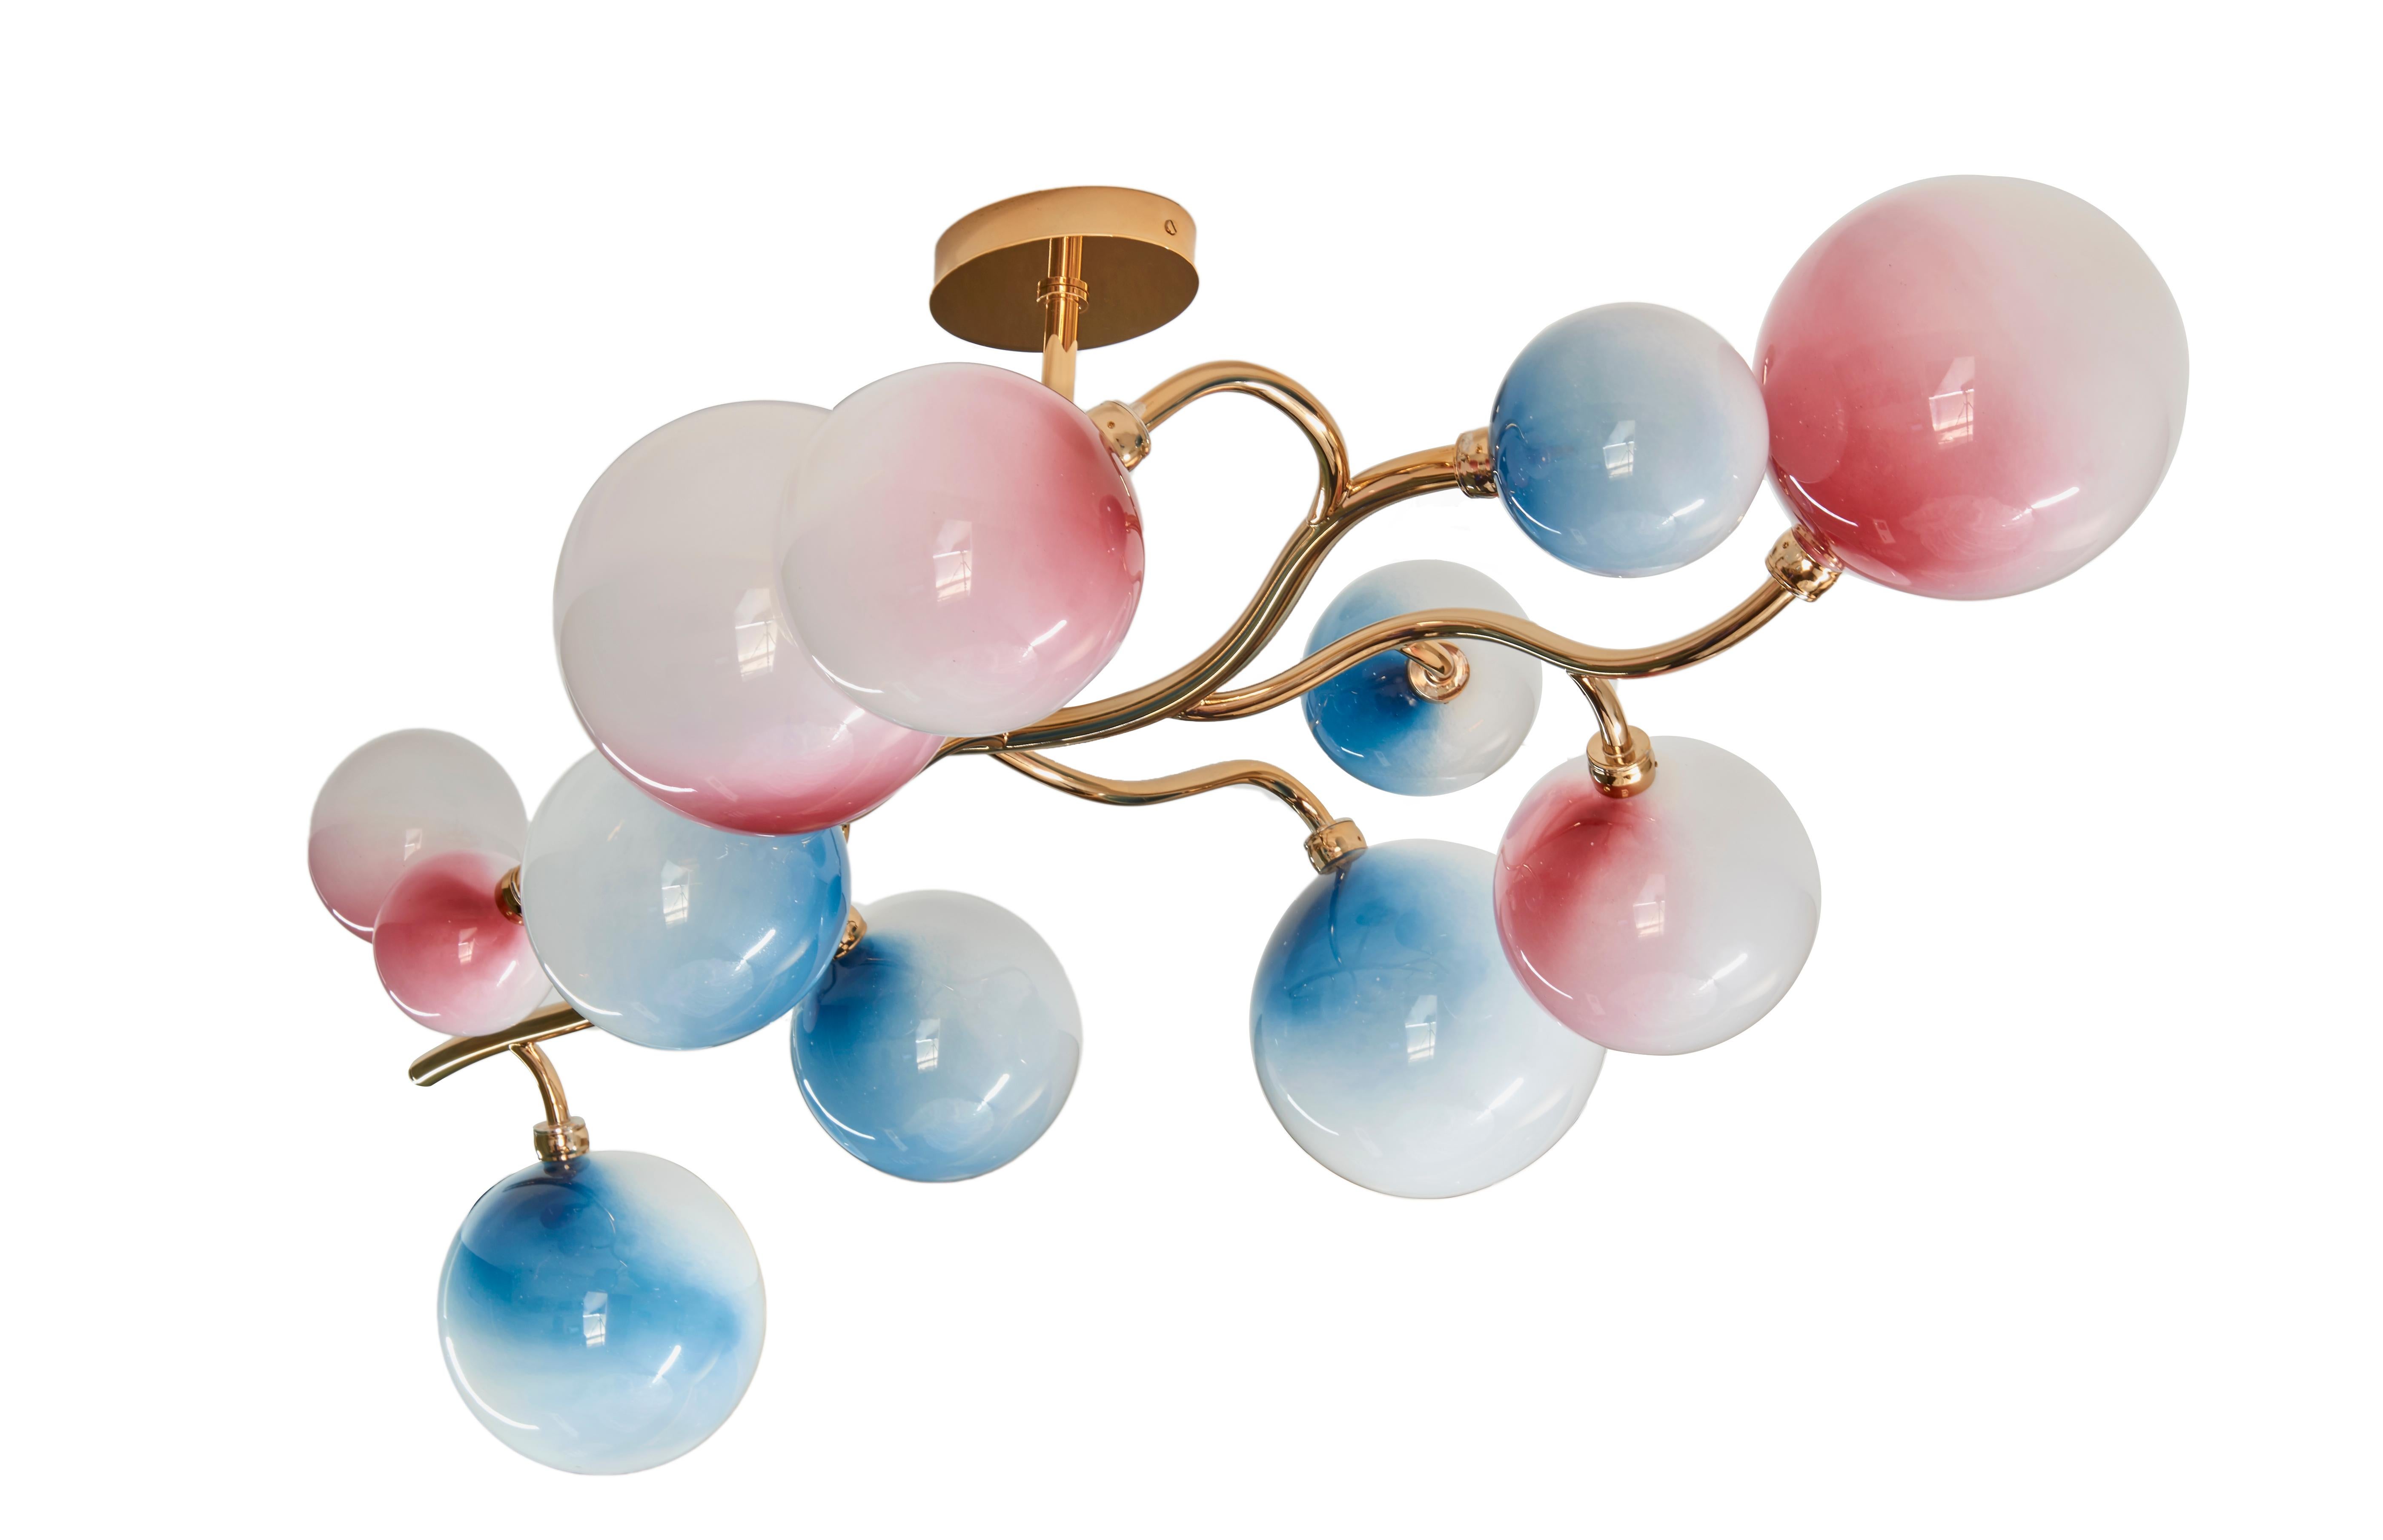 Dionysos chandelier by Emilie Lemardeley, artist.
Polished or brushed brass.
Hand blown glass.
Pink and blue gradation on opalin glass.
Handmade in France, limited edition of 12.

Size: 
width 47.24 inch
height 15.74 inch
deep 23.62